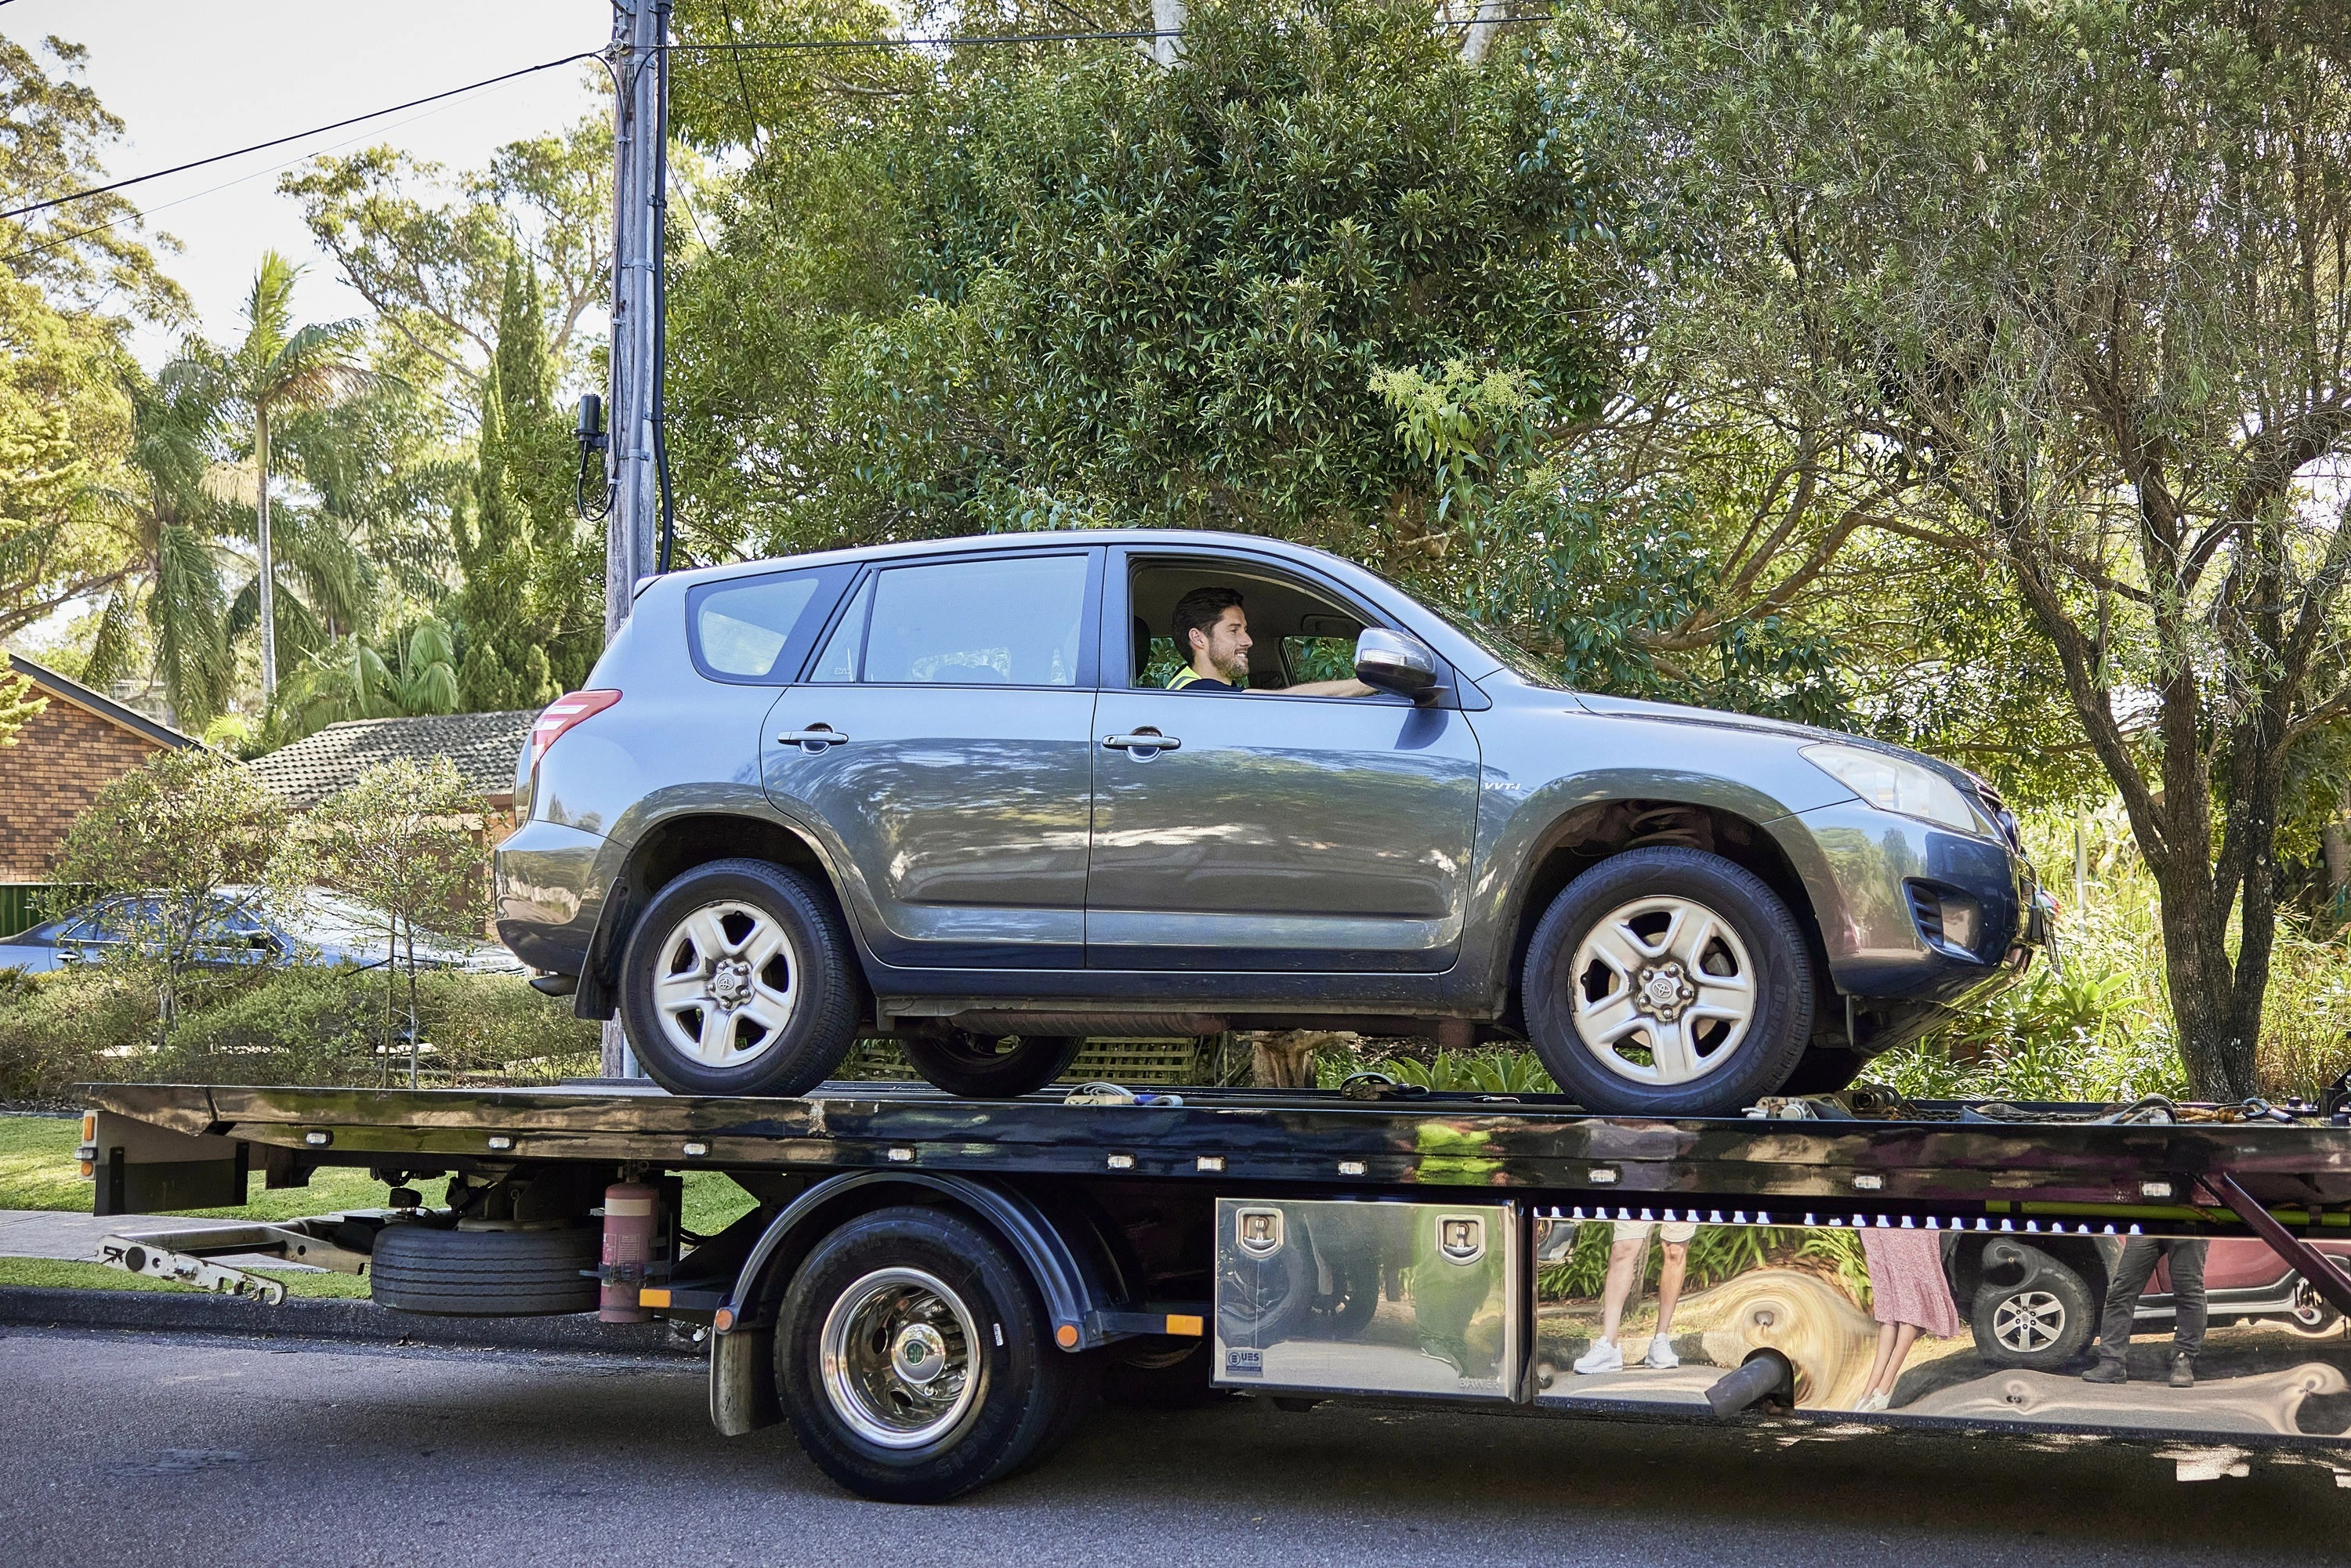 Choosing Between Car Trailer and Tow Dolly: A Comparative Analysis